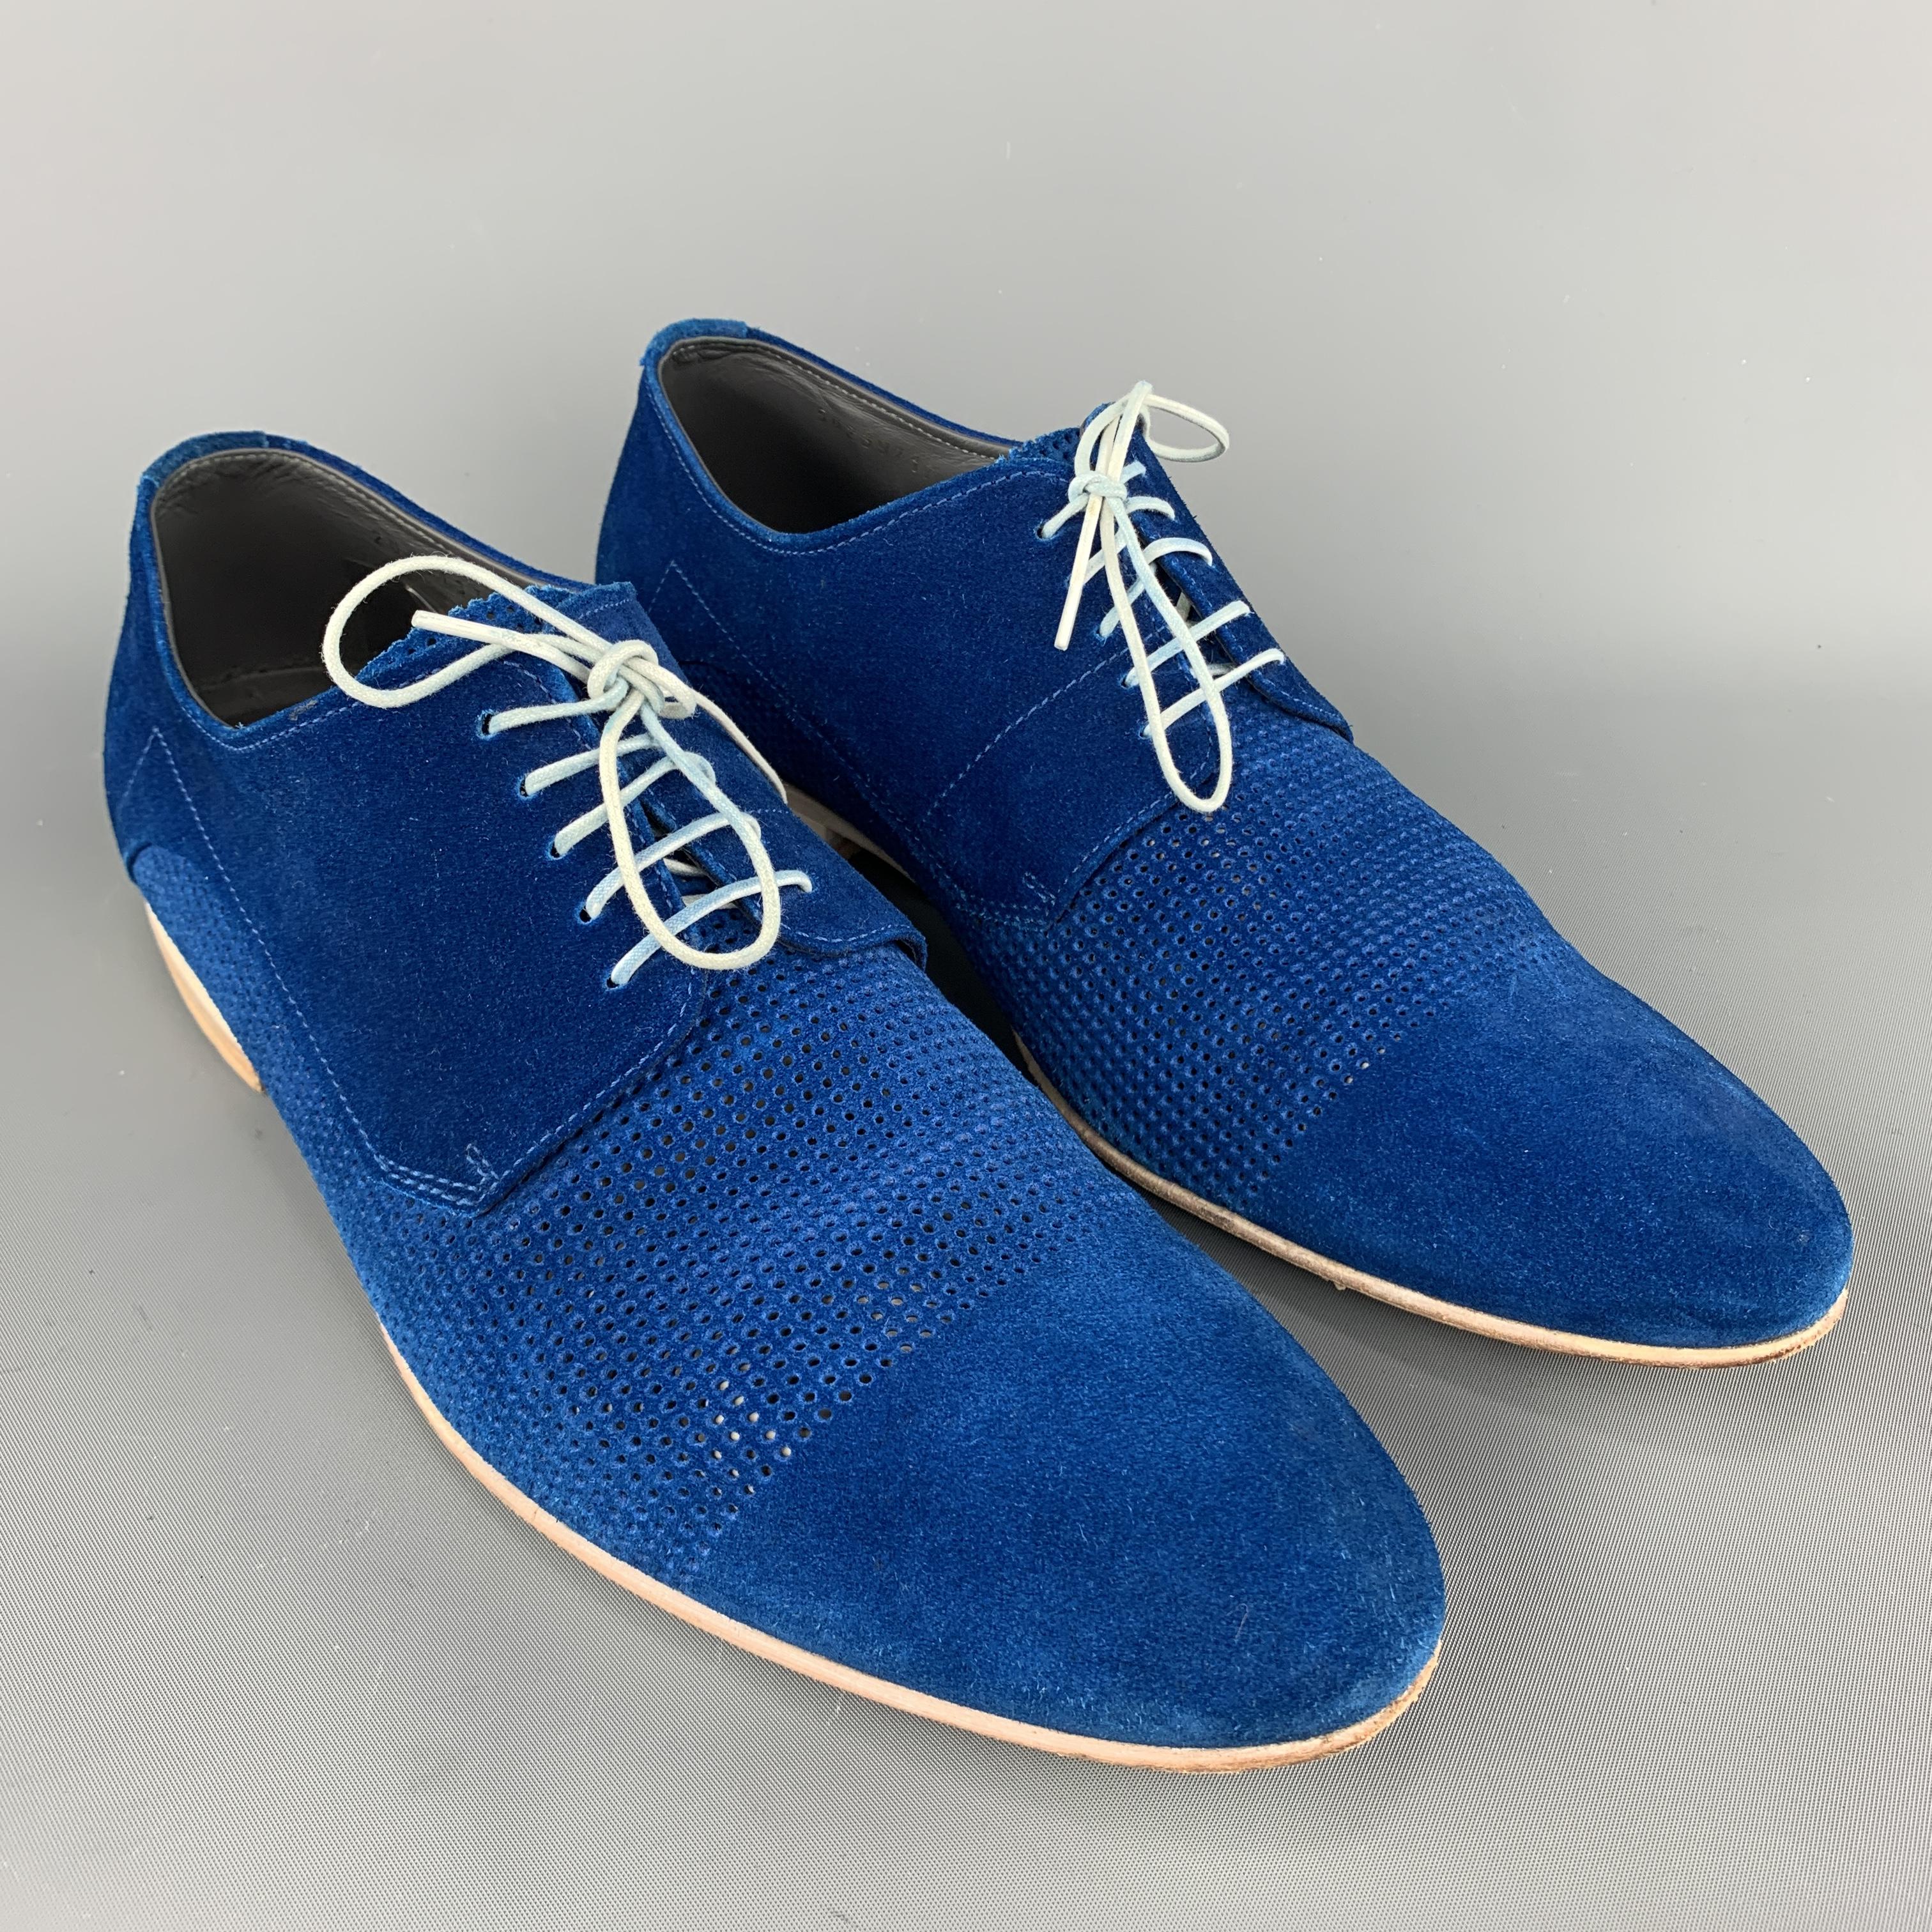 Hugo Hugo Boss dress shoes come in blue suede with a pointed toe, peforated mid panel, and stacked heel. Made in Italy.
 

Excellent Pre-Owned Condition.
Marked: IT 42 1/2

Outsole: 11.75 x 4 in.